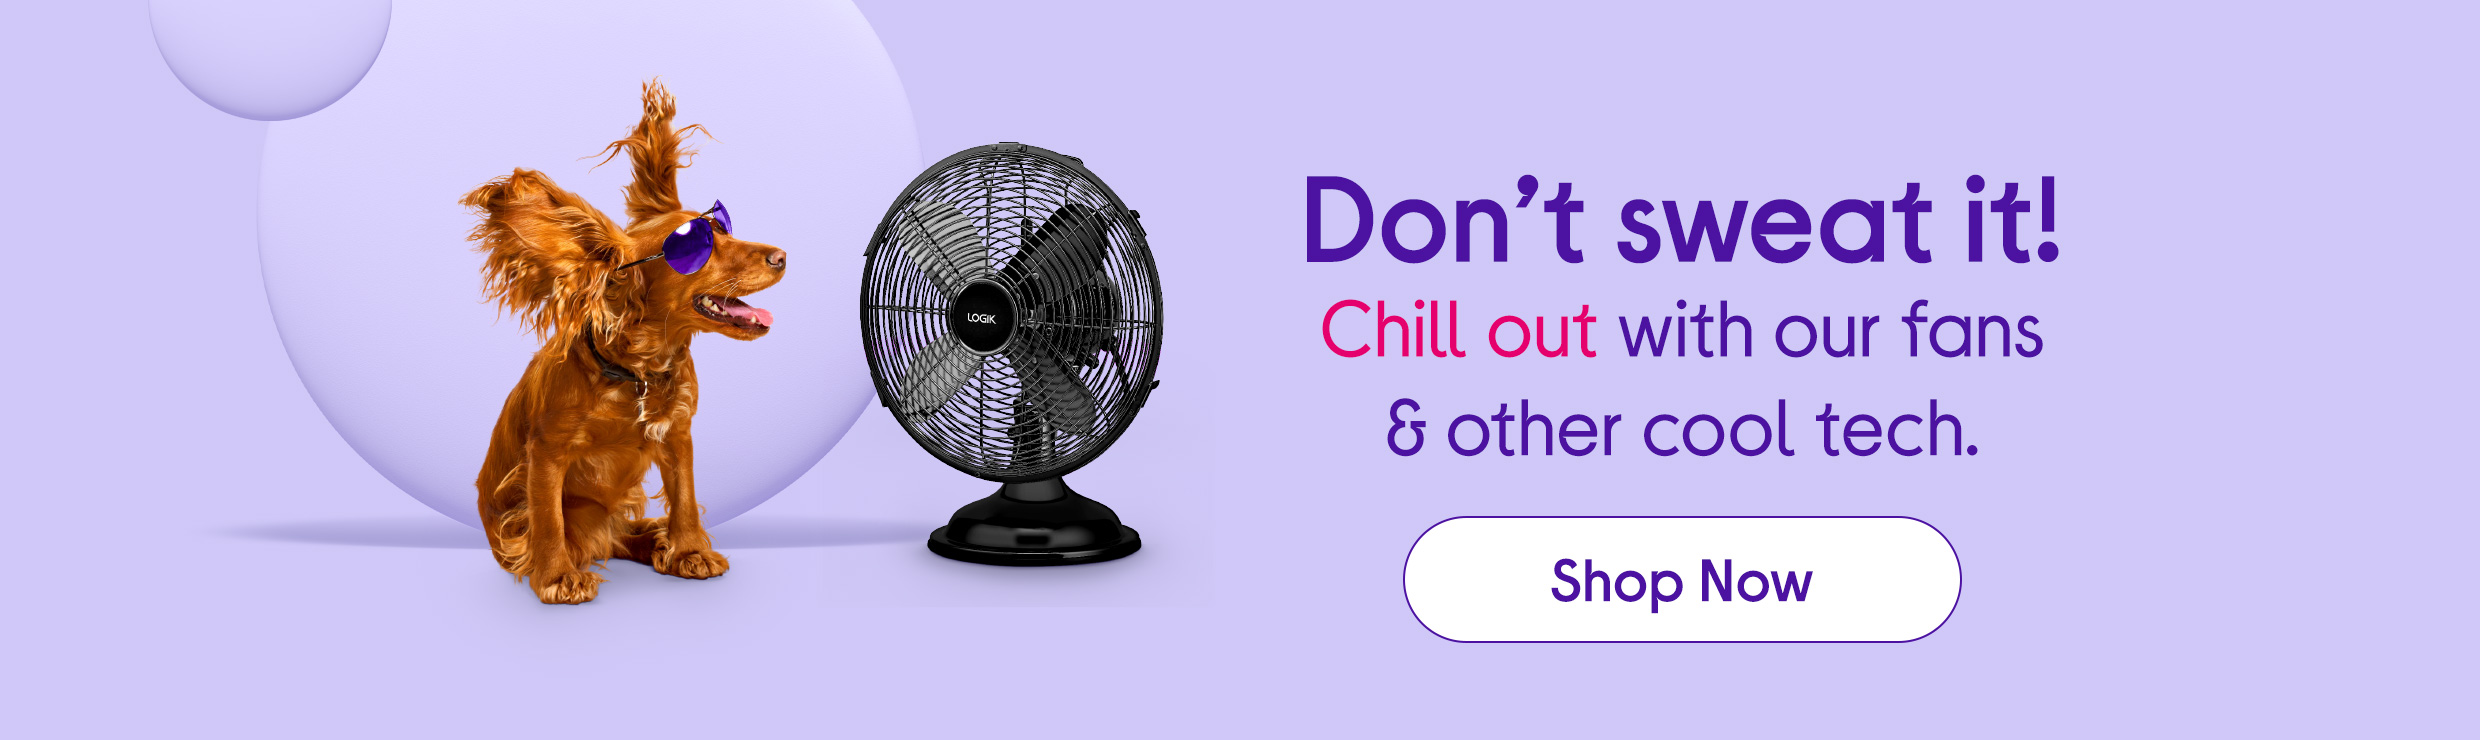 Tech for keeping cool at Currys